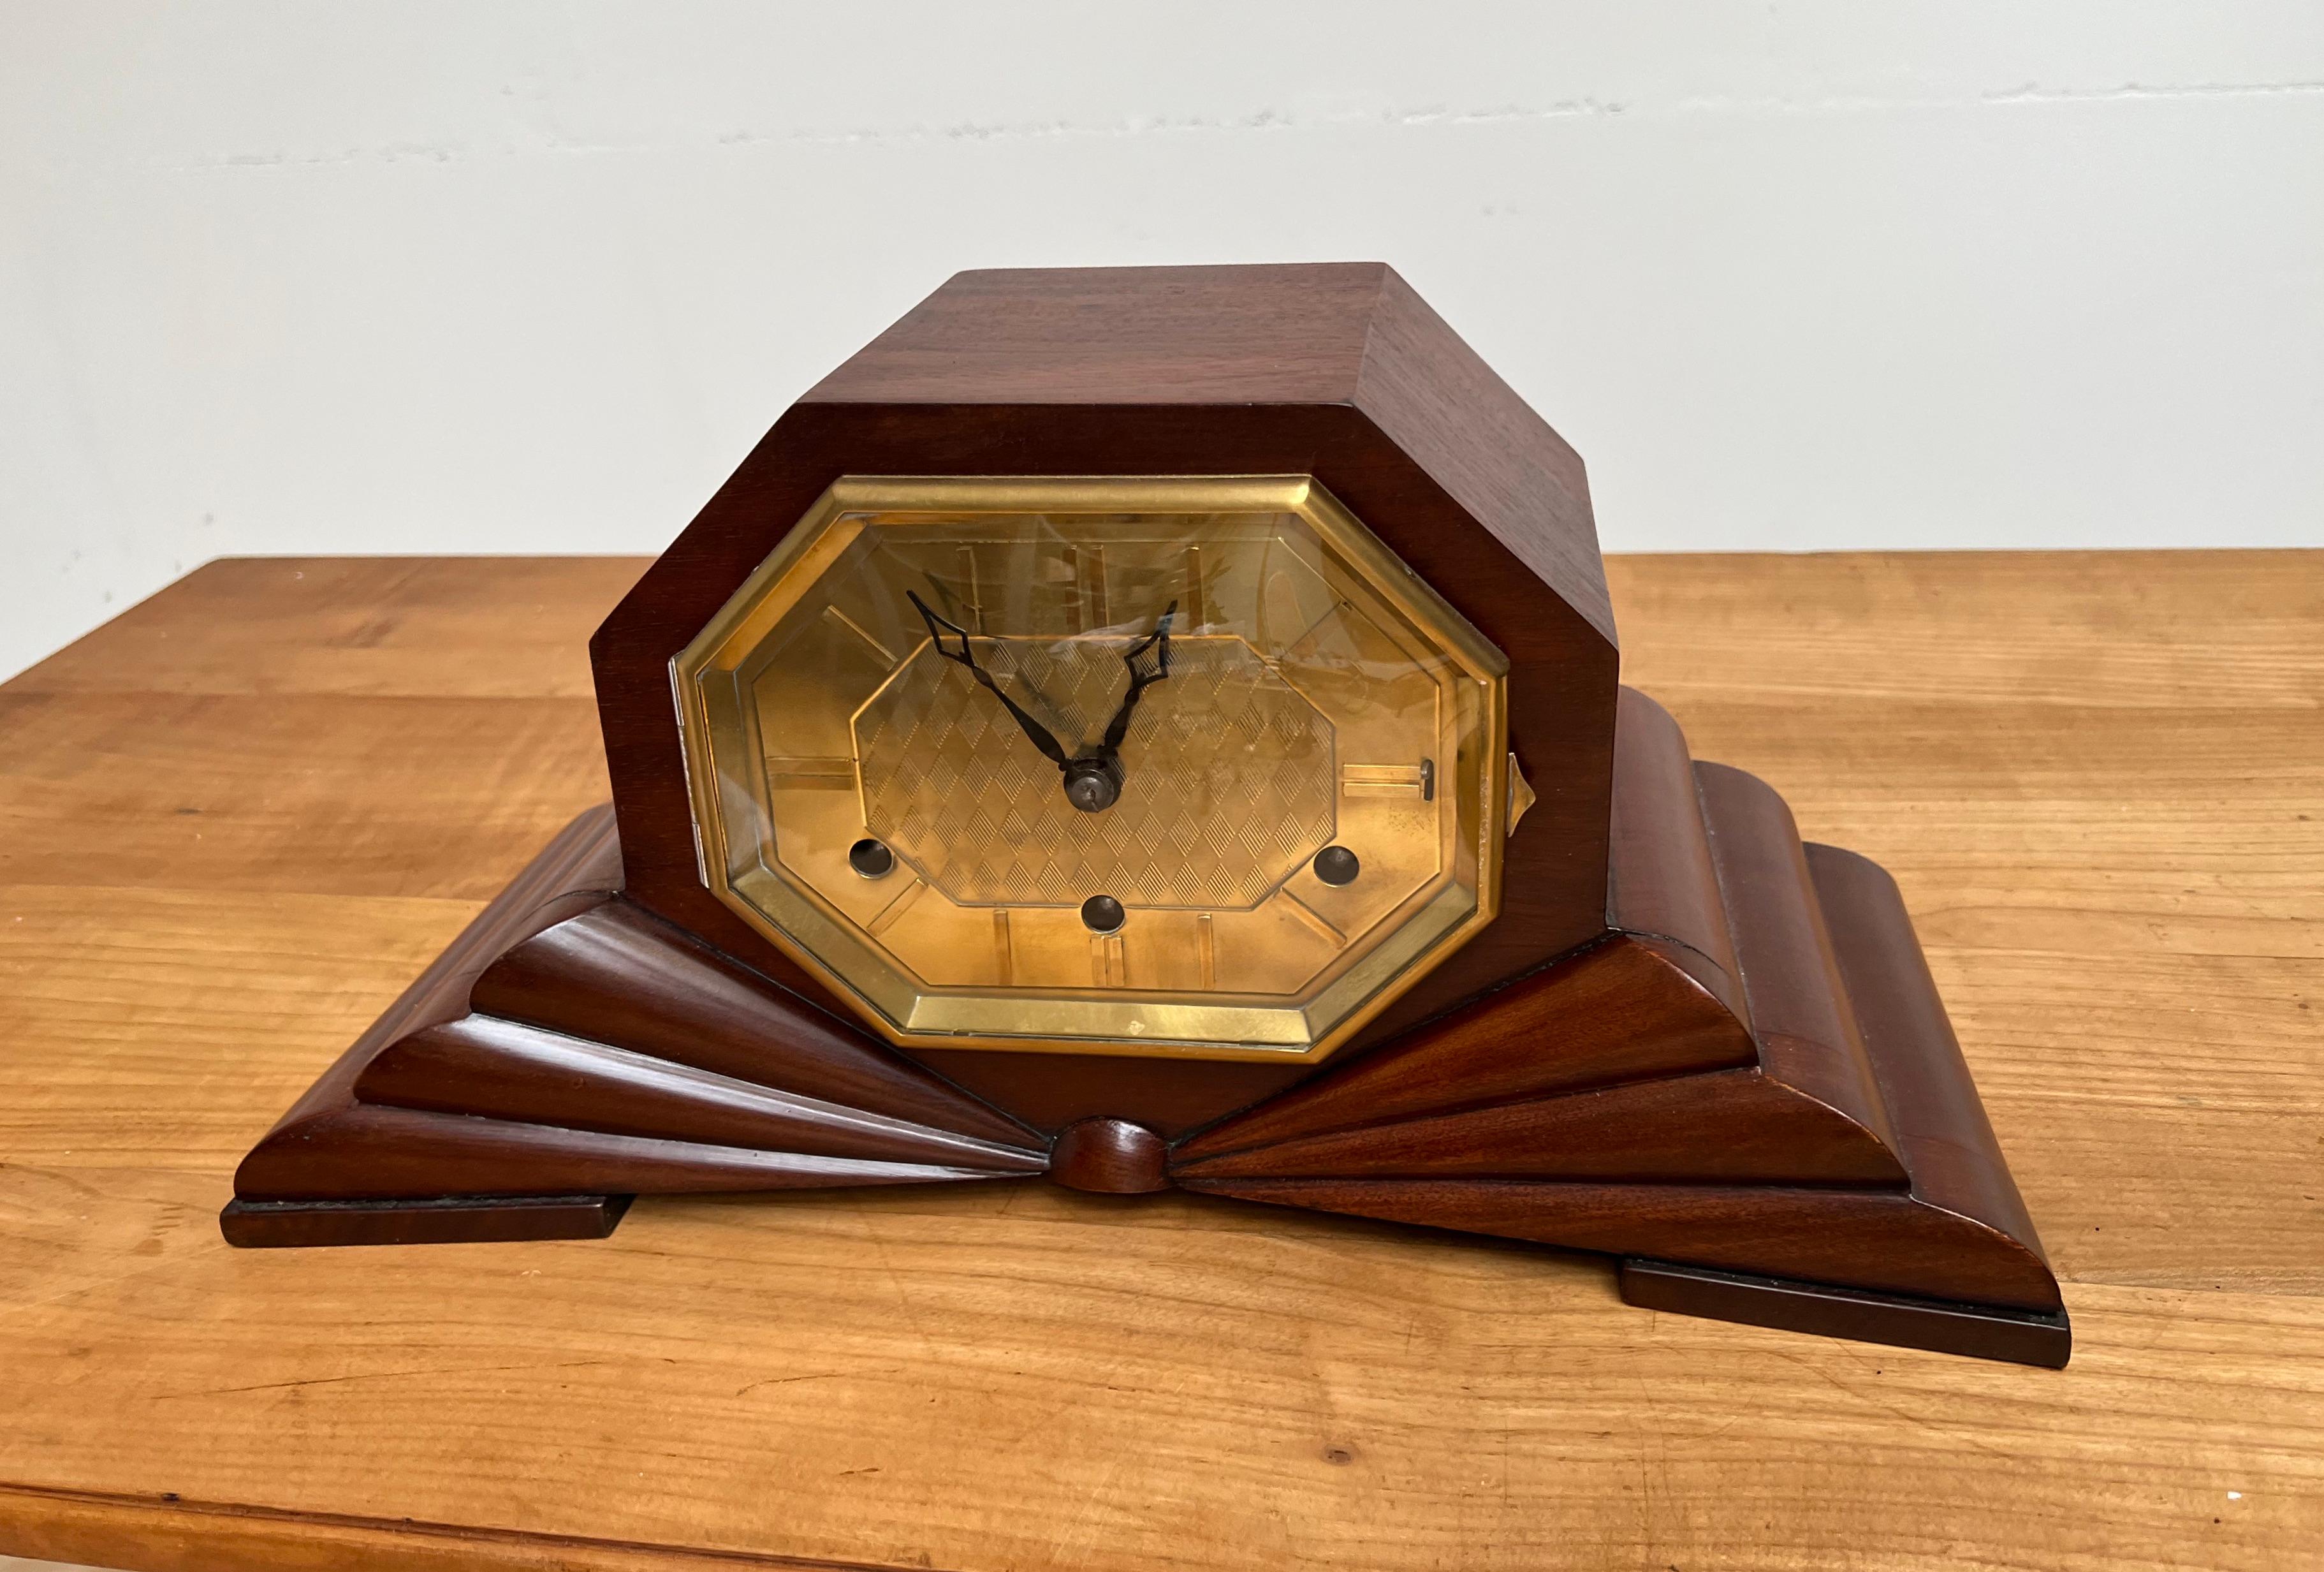 Pure Art Deco, Marvelous Design & Warm Color Nutwood Mantle / Desk / Table Clock In Excellent Condition For Sale In Lisse, NL